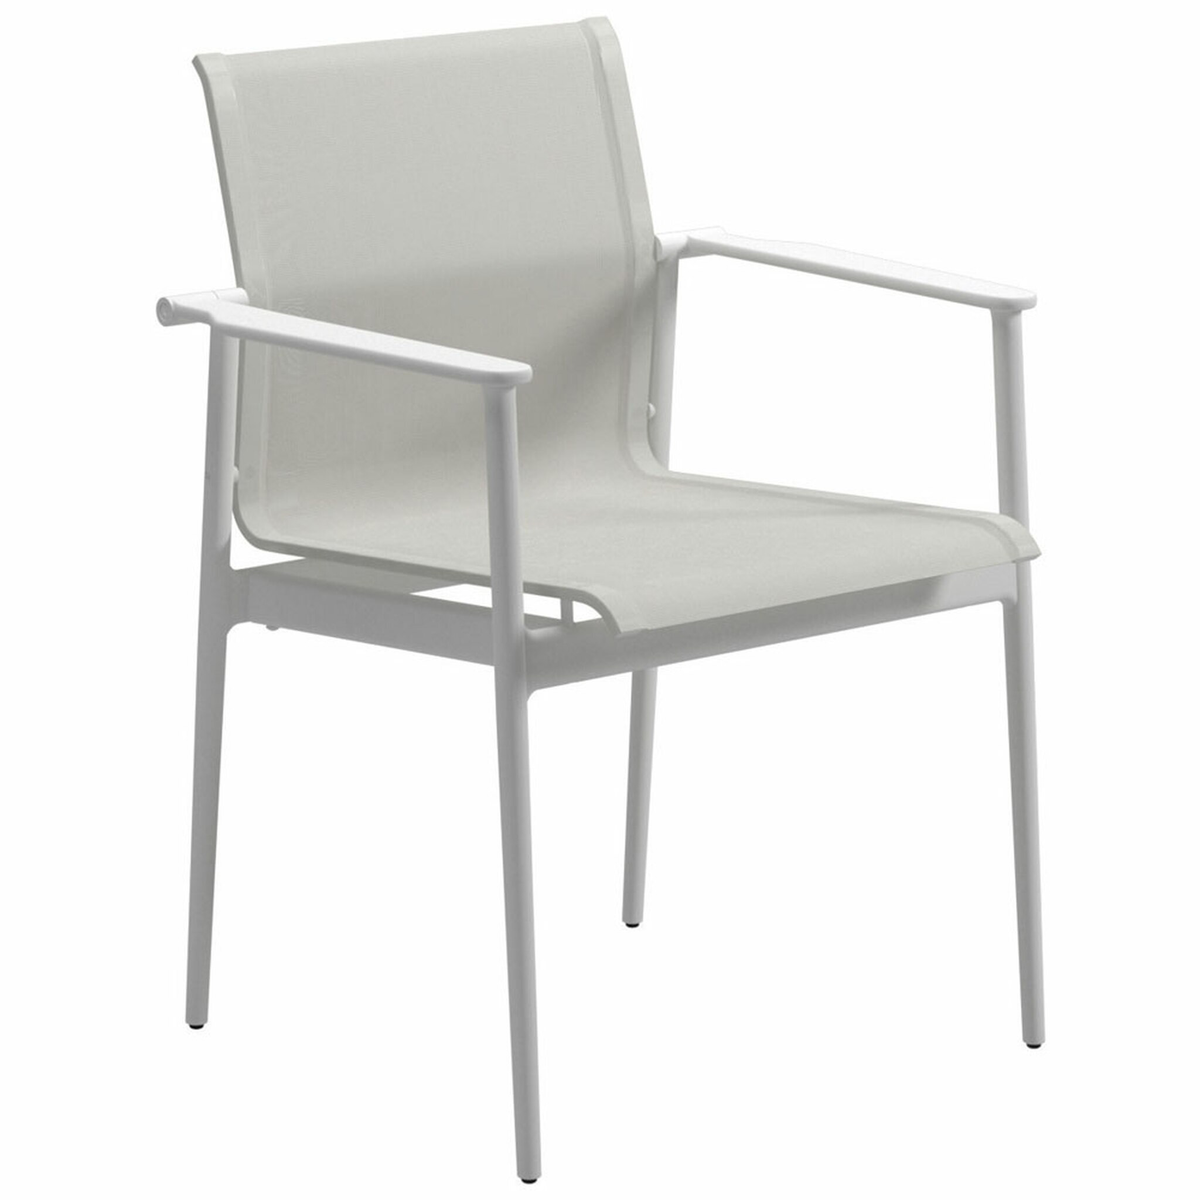 180 Stacking Dining Chair with arms